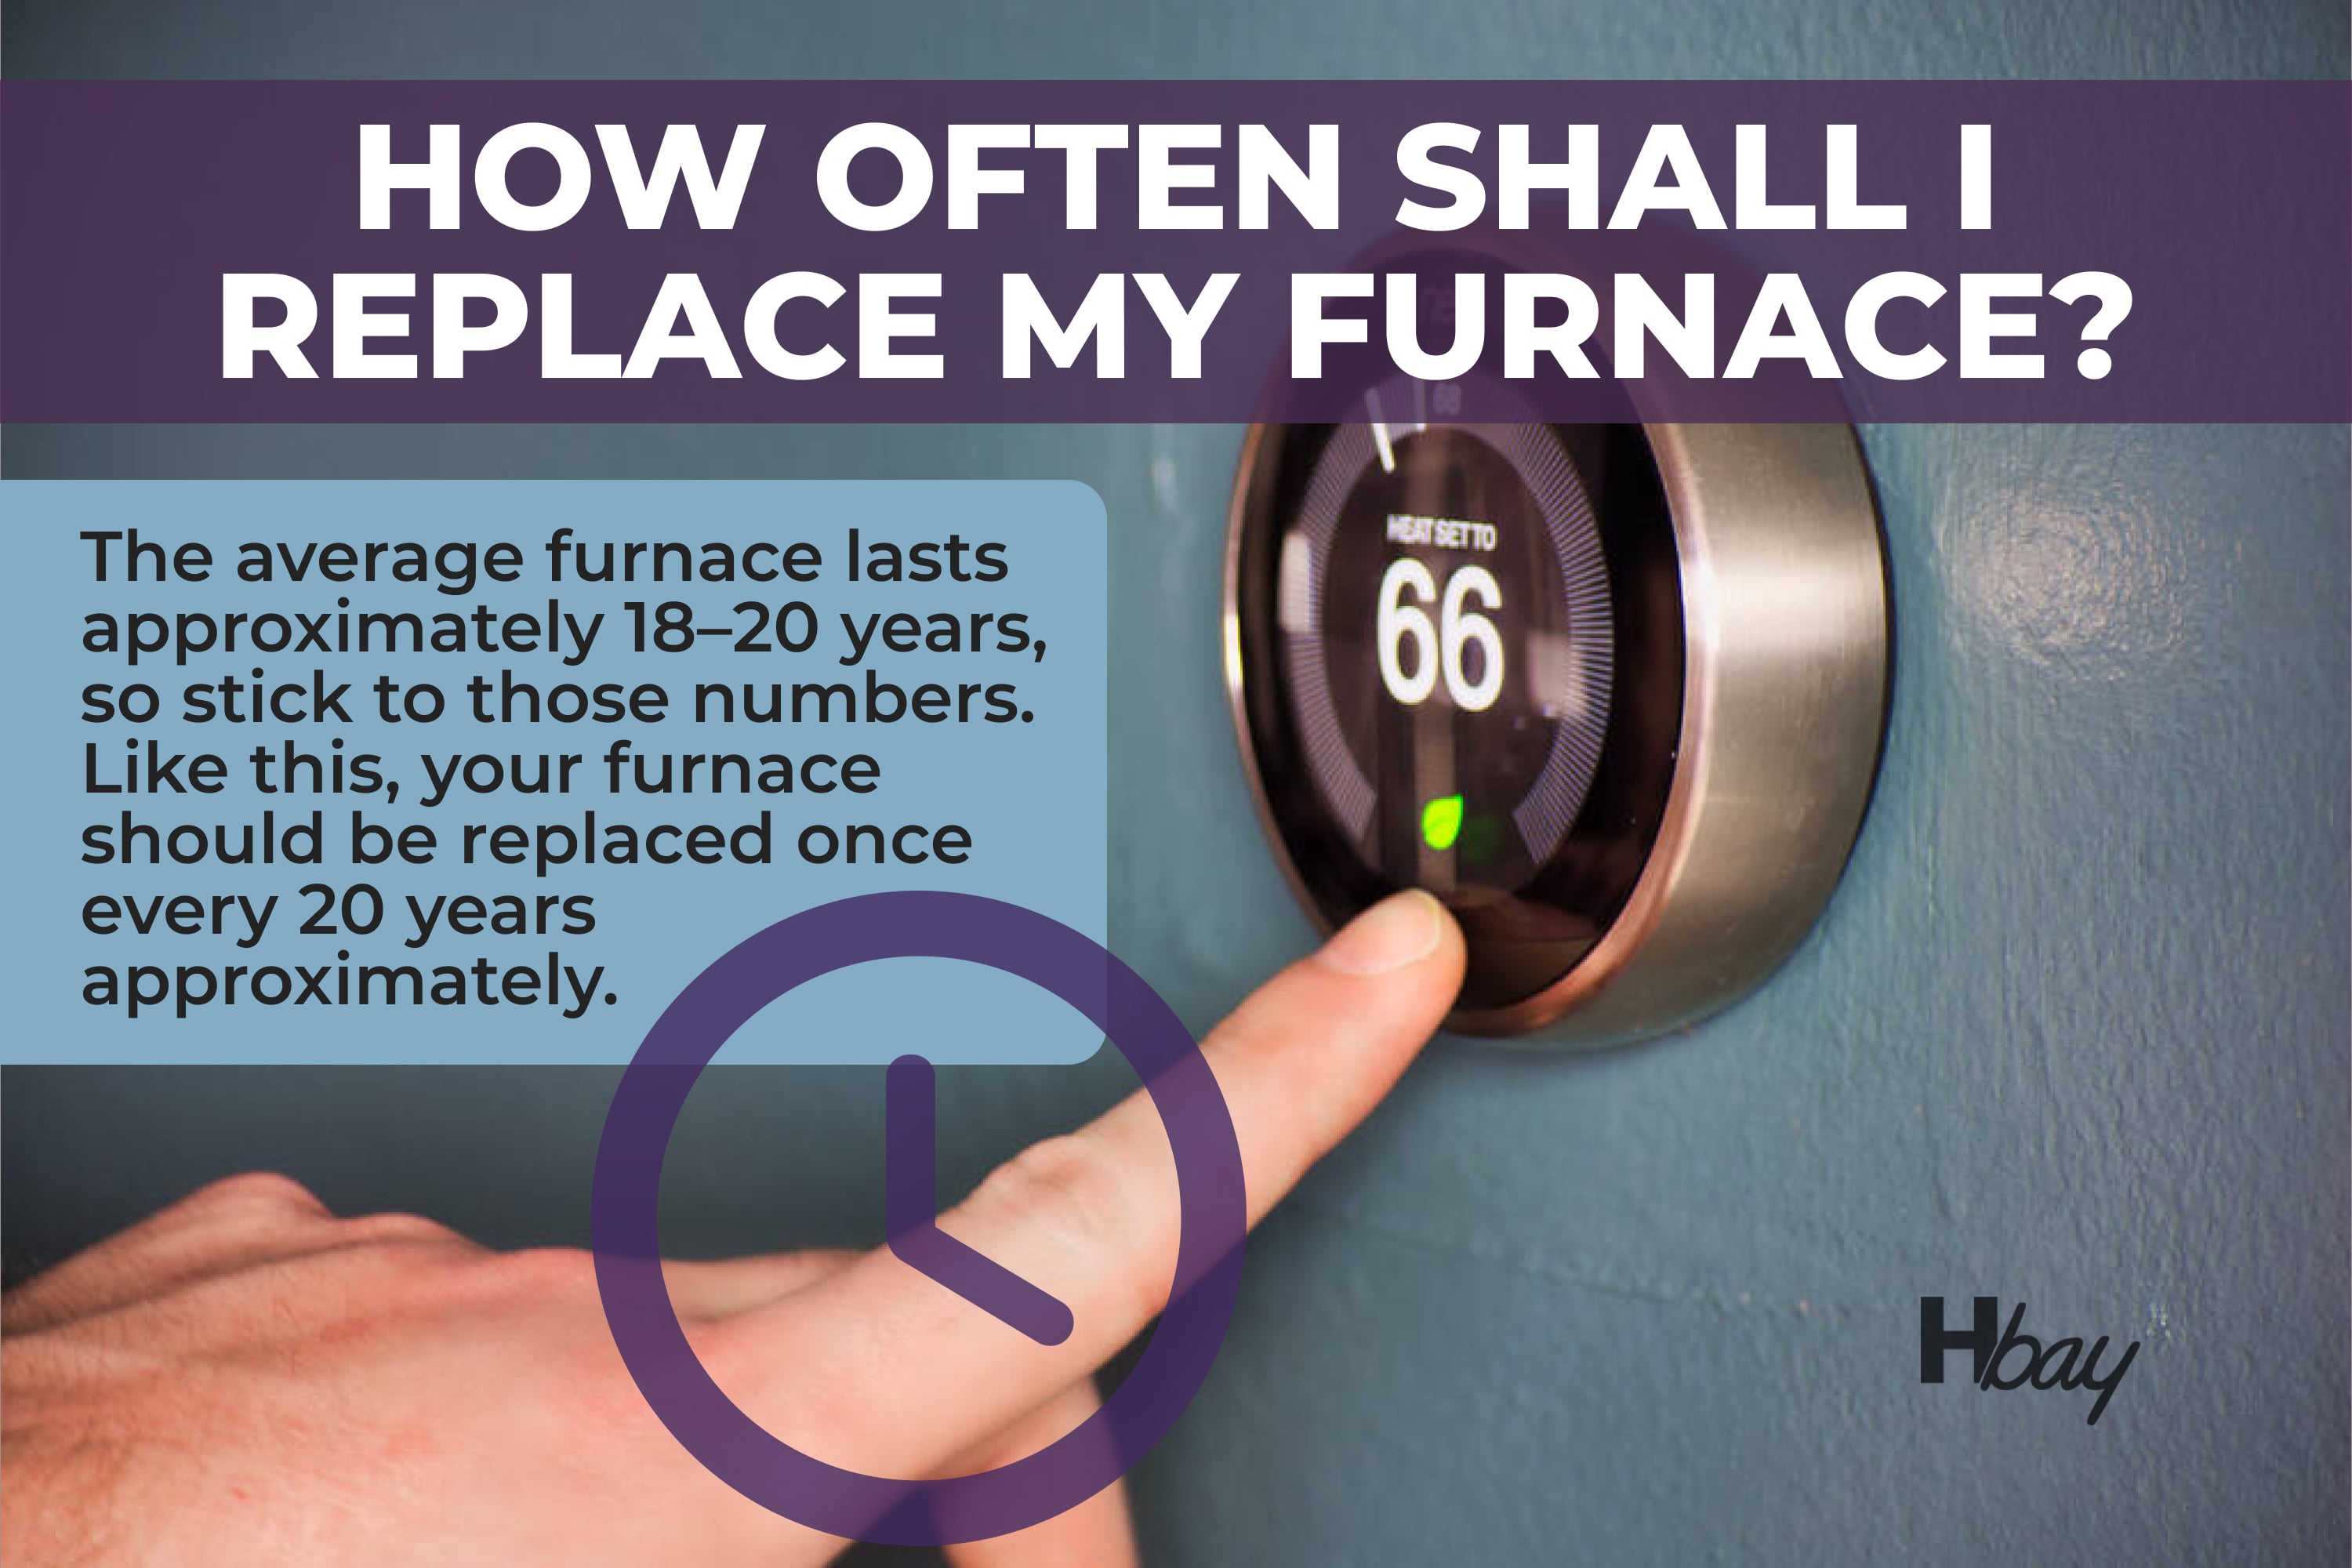 How often shall I replace my furnace